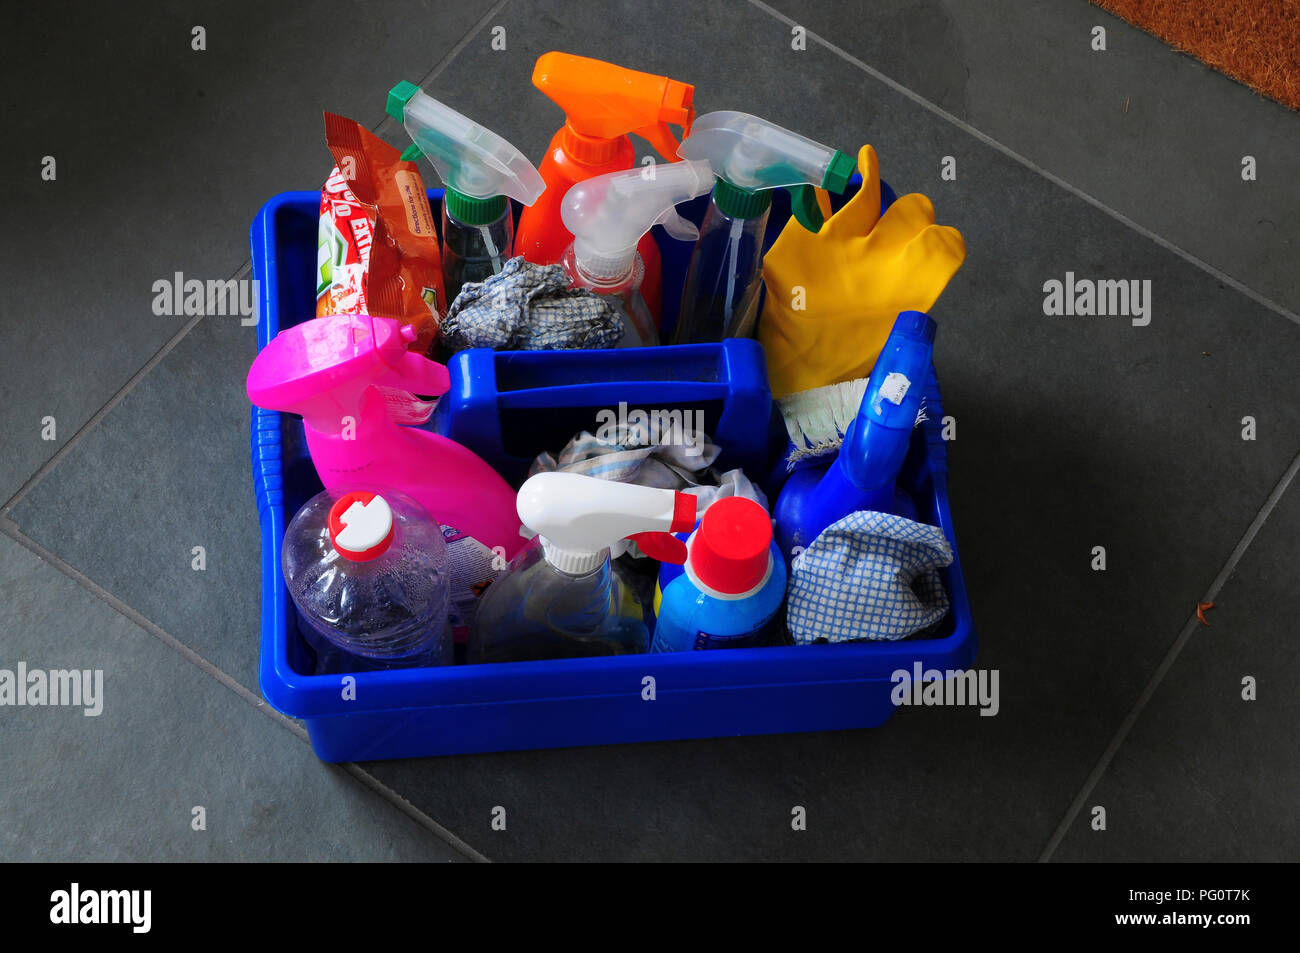 Tray of cleaning materials Stock Photo